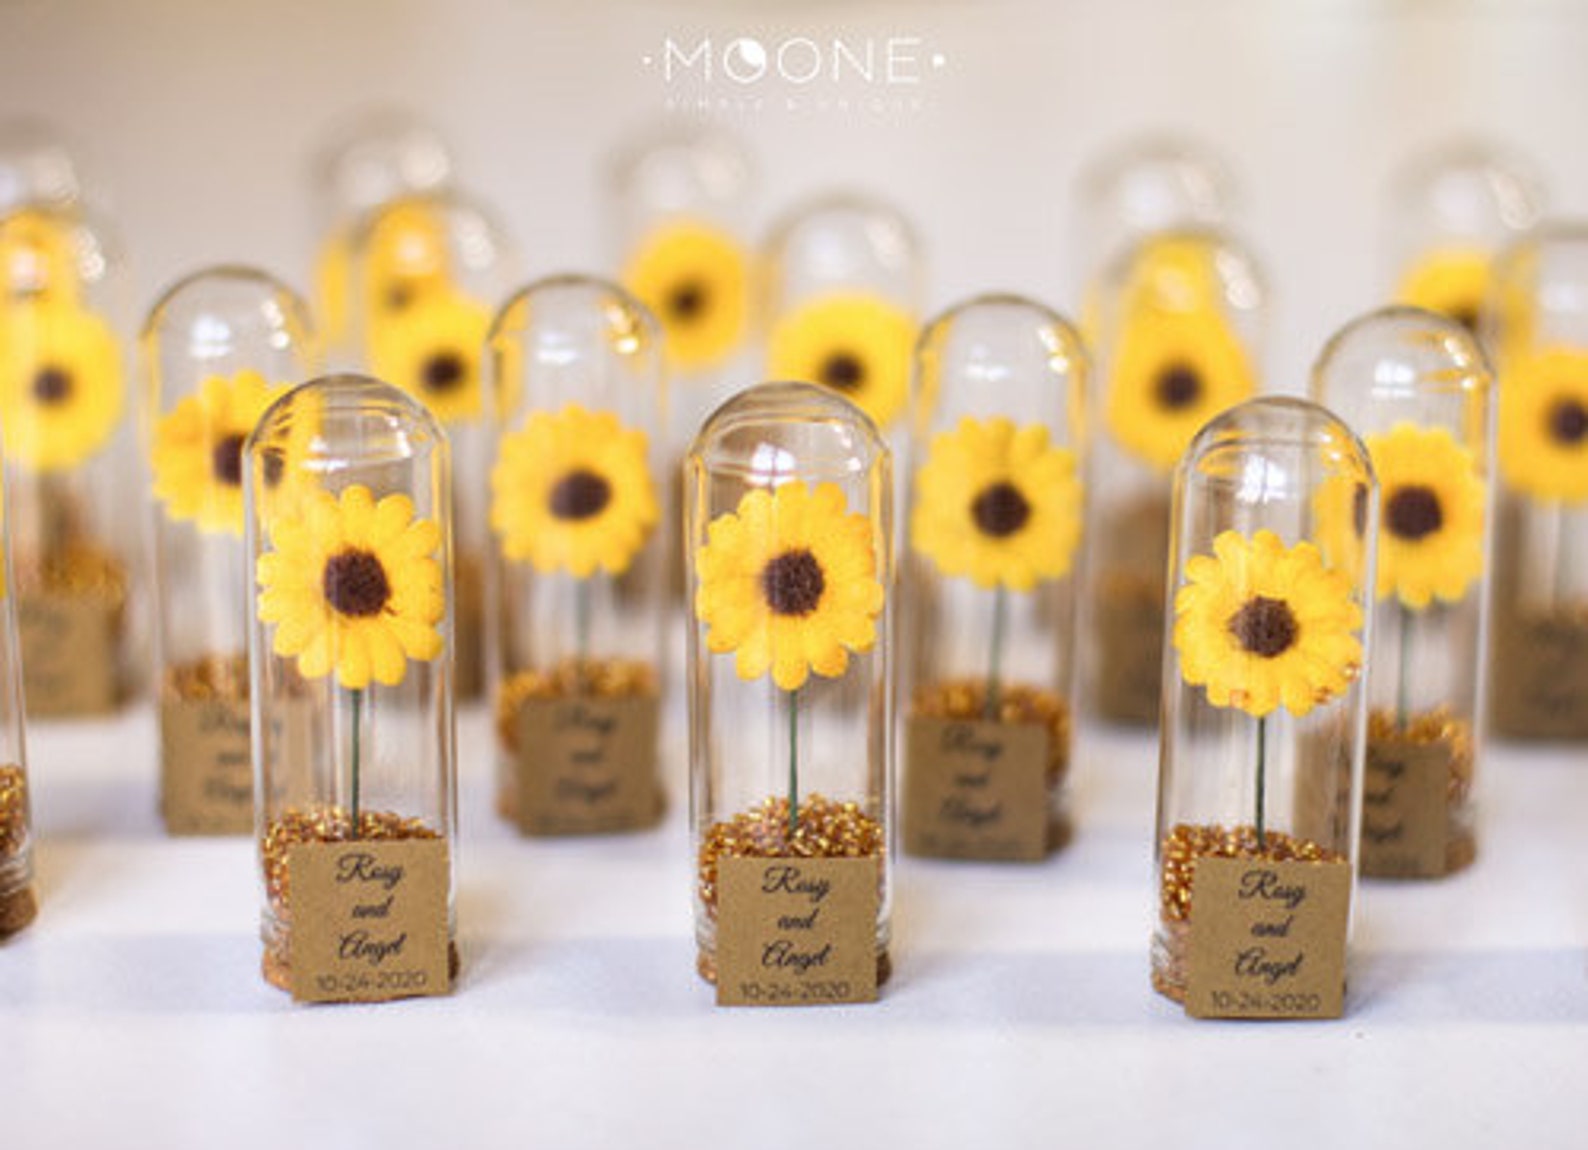 10pcs Sunflower Wedding Favors for Guests Sunflower Party